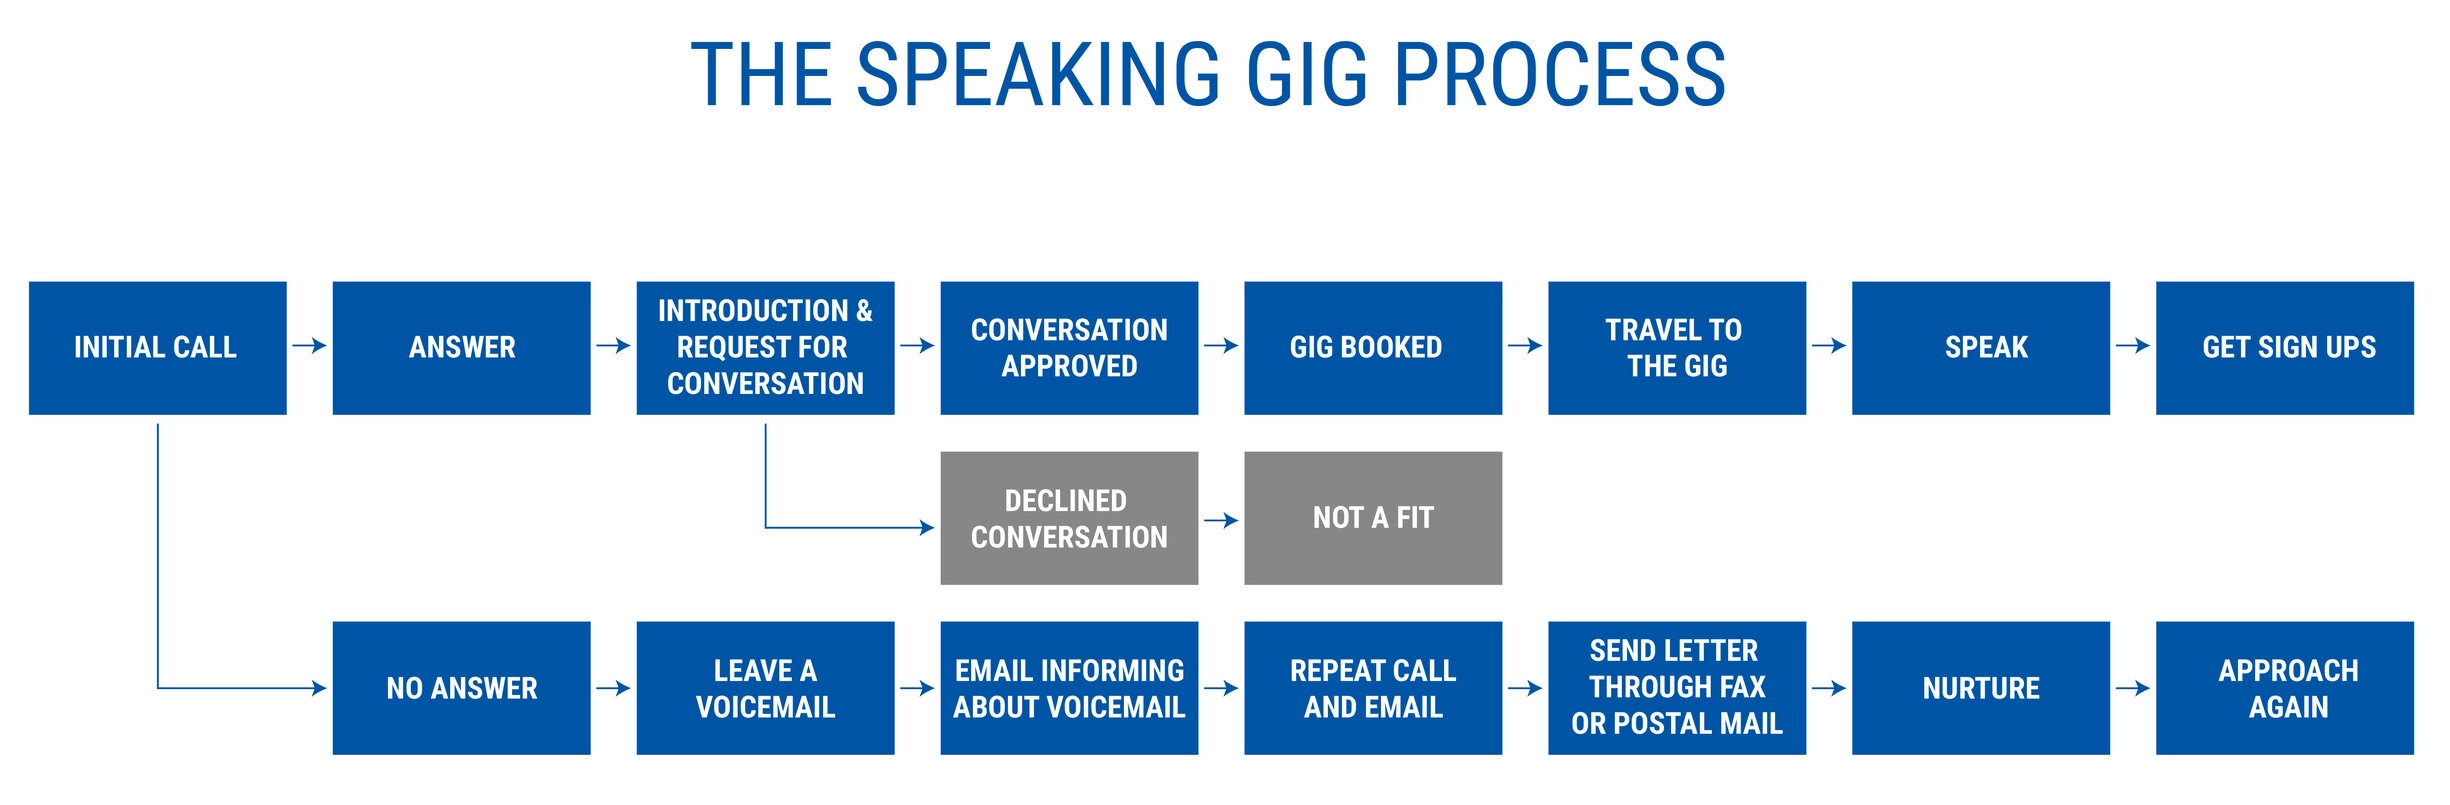 the speaking gig process - starting a coaching business while working full-time